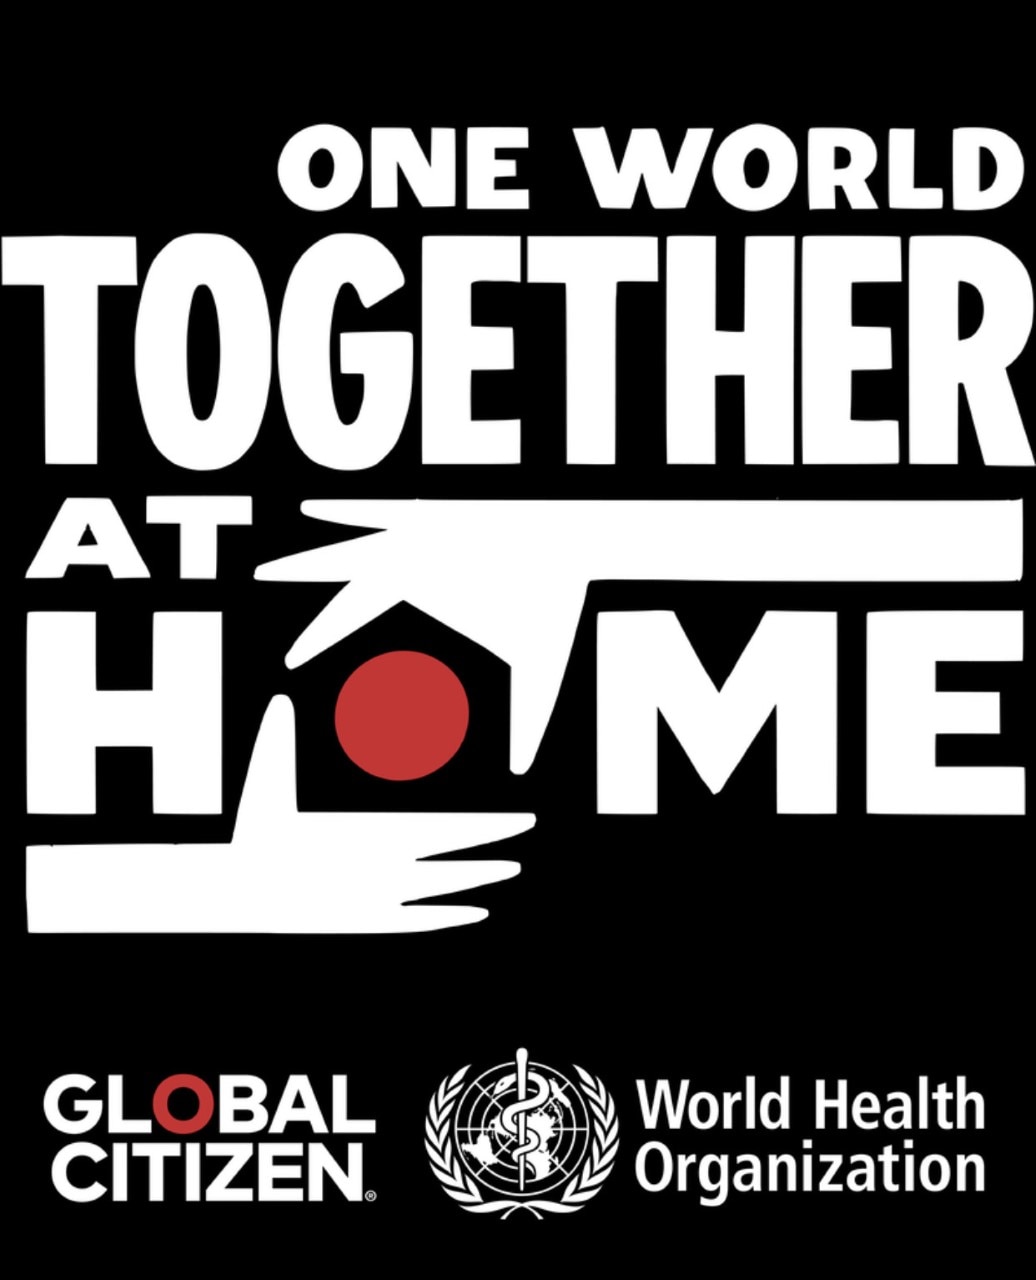 SKY brings televised "One World Together at Home' featuring John Legend Taylor Swift, Shawn Mendez, and more